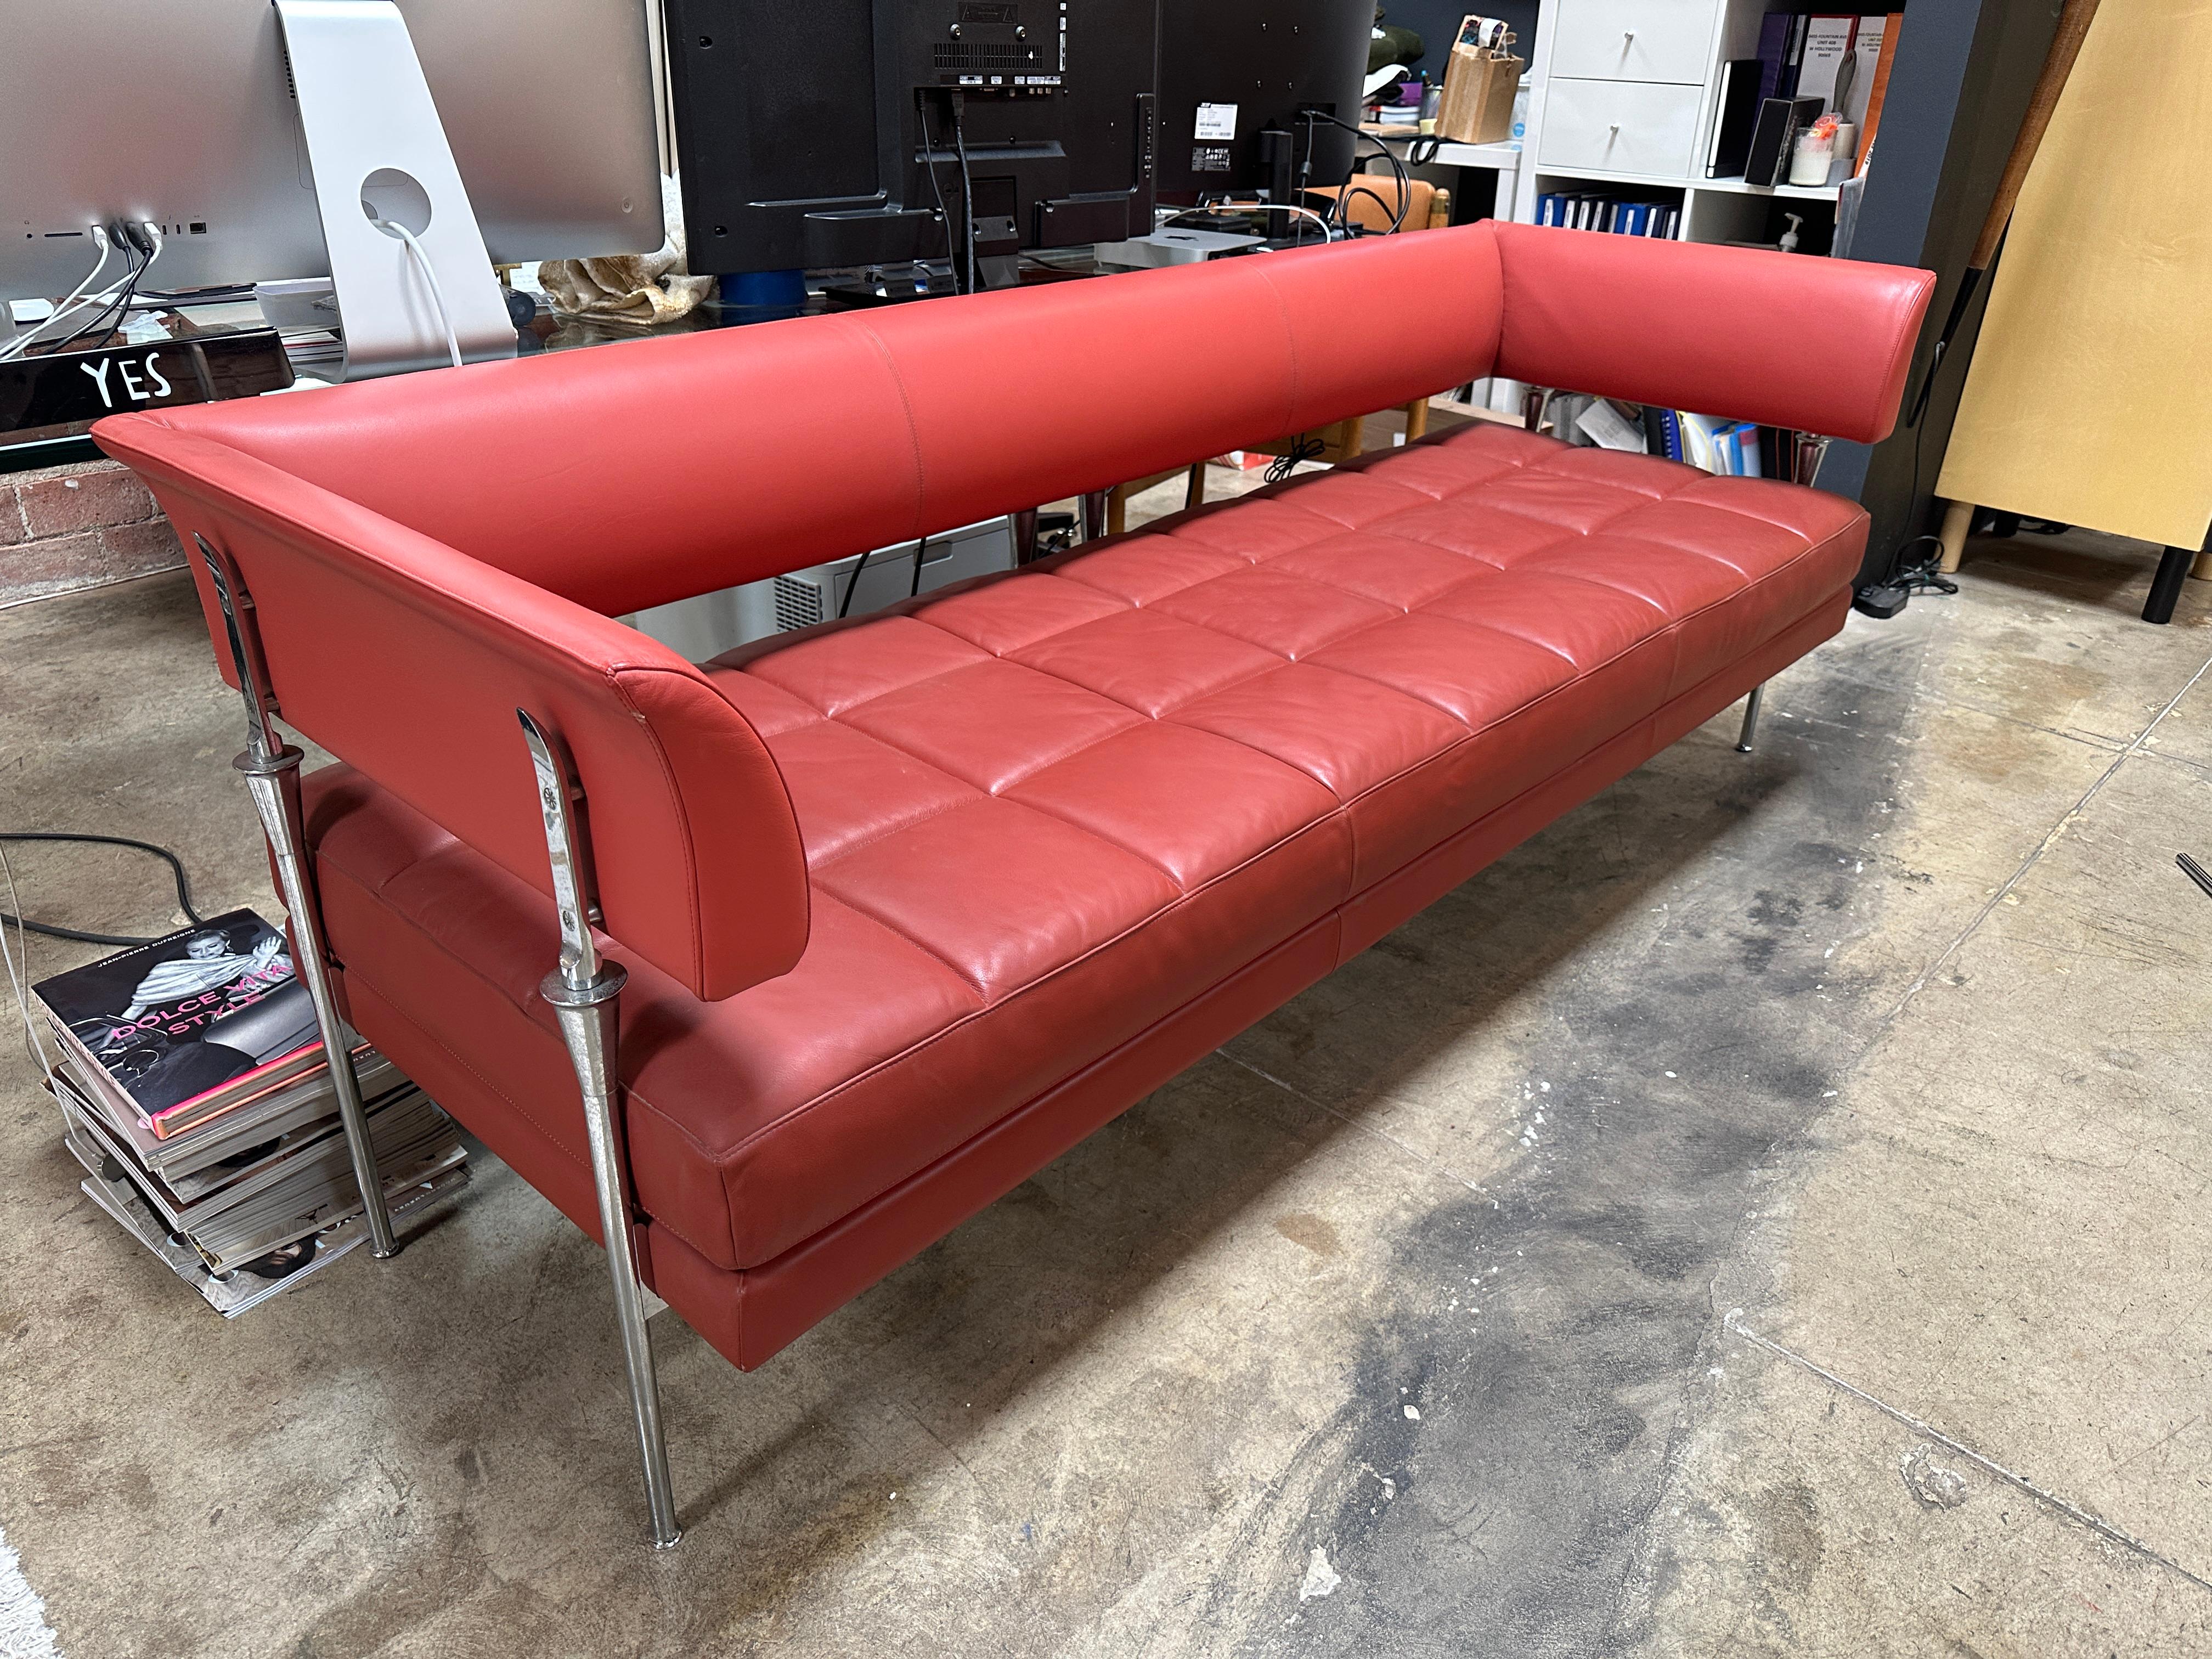 The Hydra Castor sofa is a piece of furniture designed by Luca Scacchetti for Poltrona Frau, an Italian furniture company. It features a striking combination of red leather and chrome, with a sleek, modern design that reflects the aesthetic of the